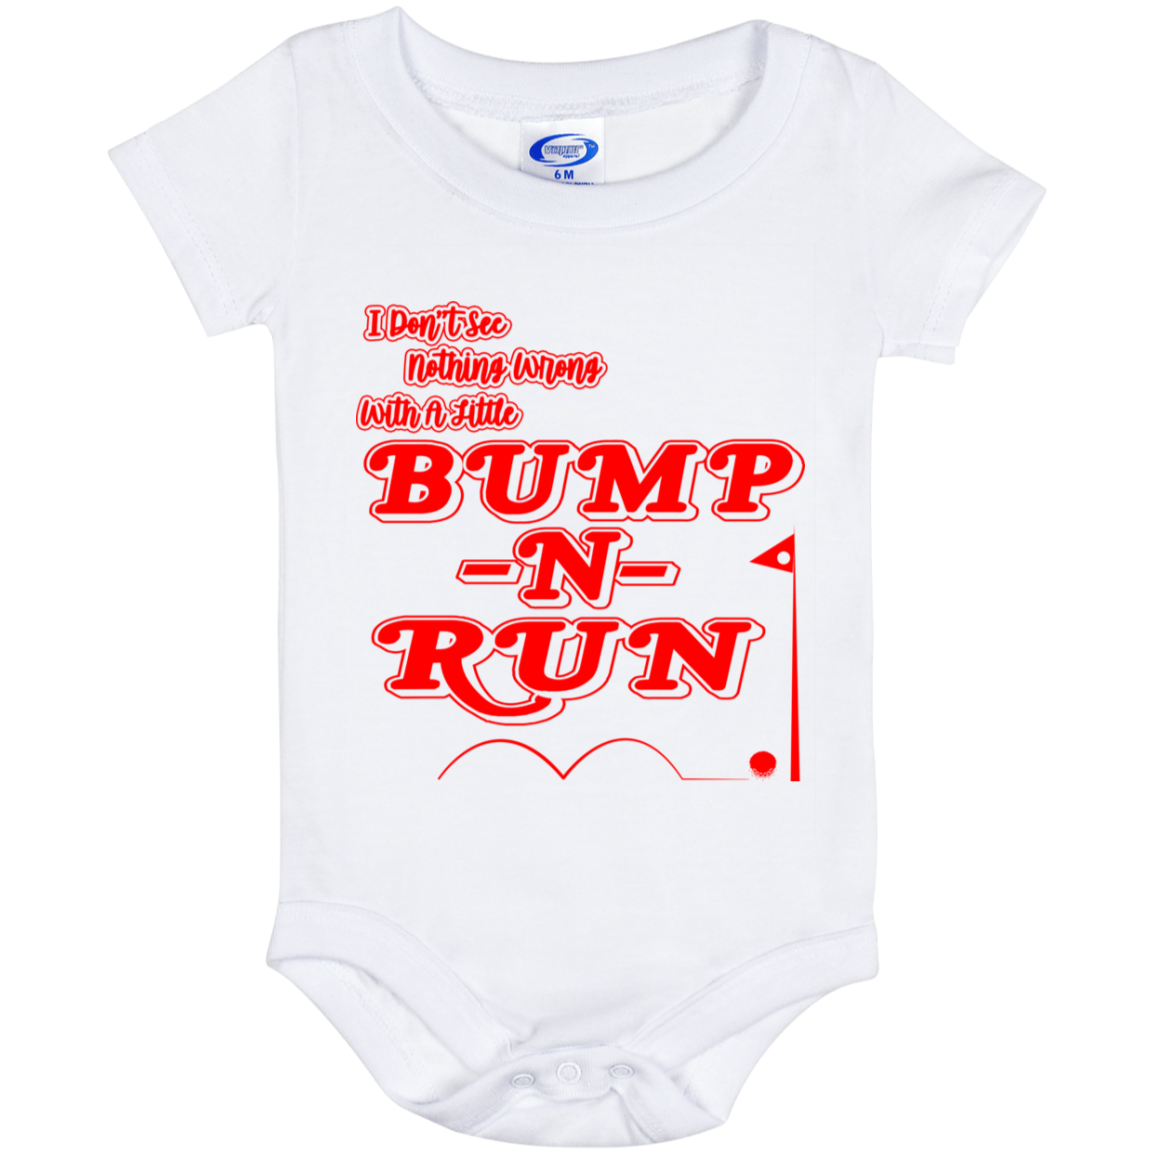 OPG Custom Design #4. I Don't See Noting Wrong With A Little Bump N Run. Baby Onesie 6 Month